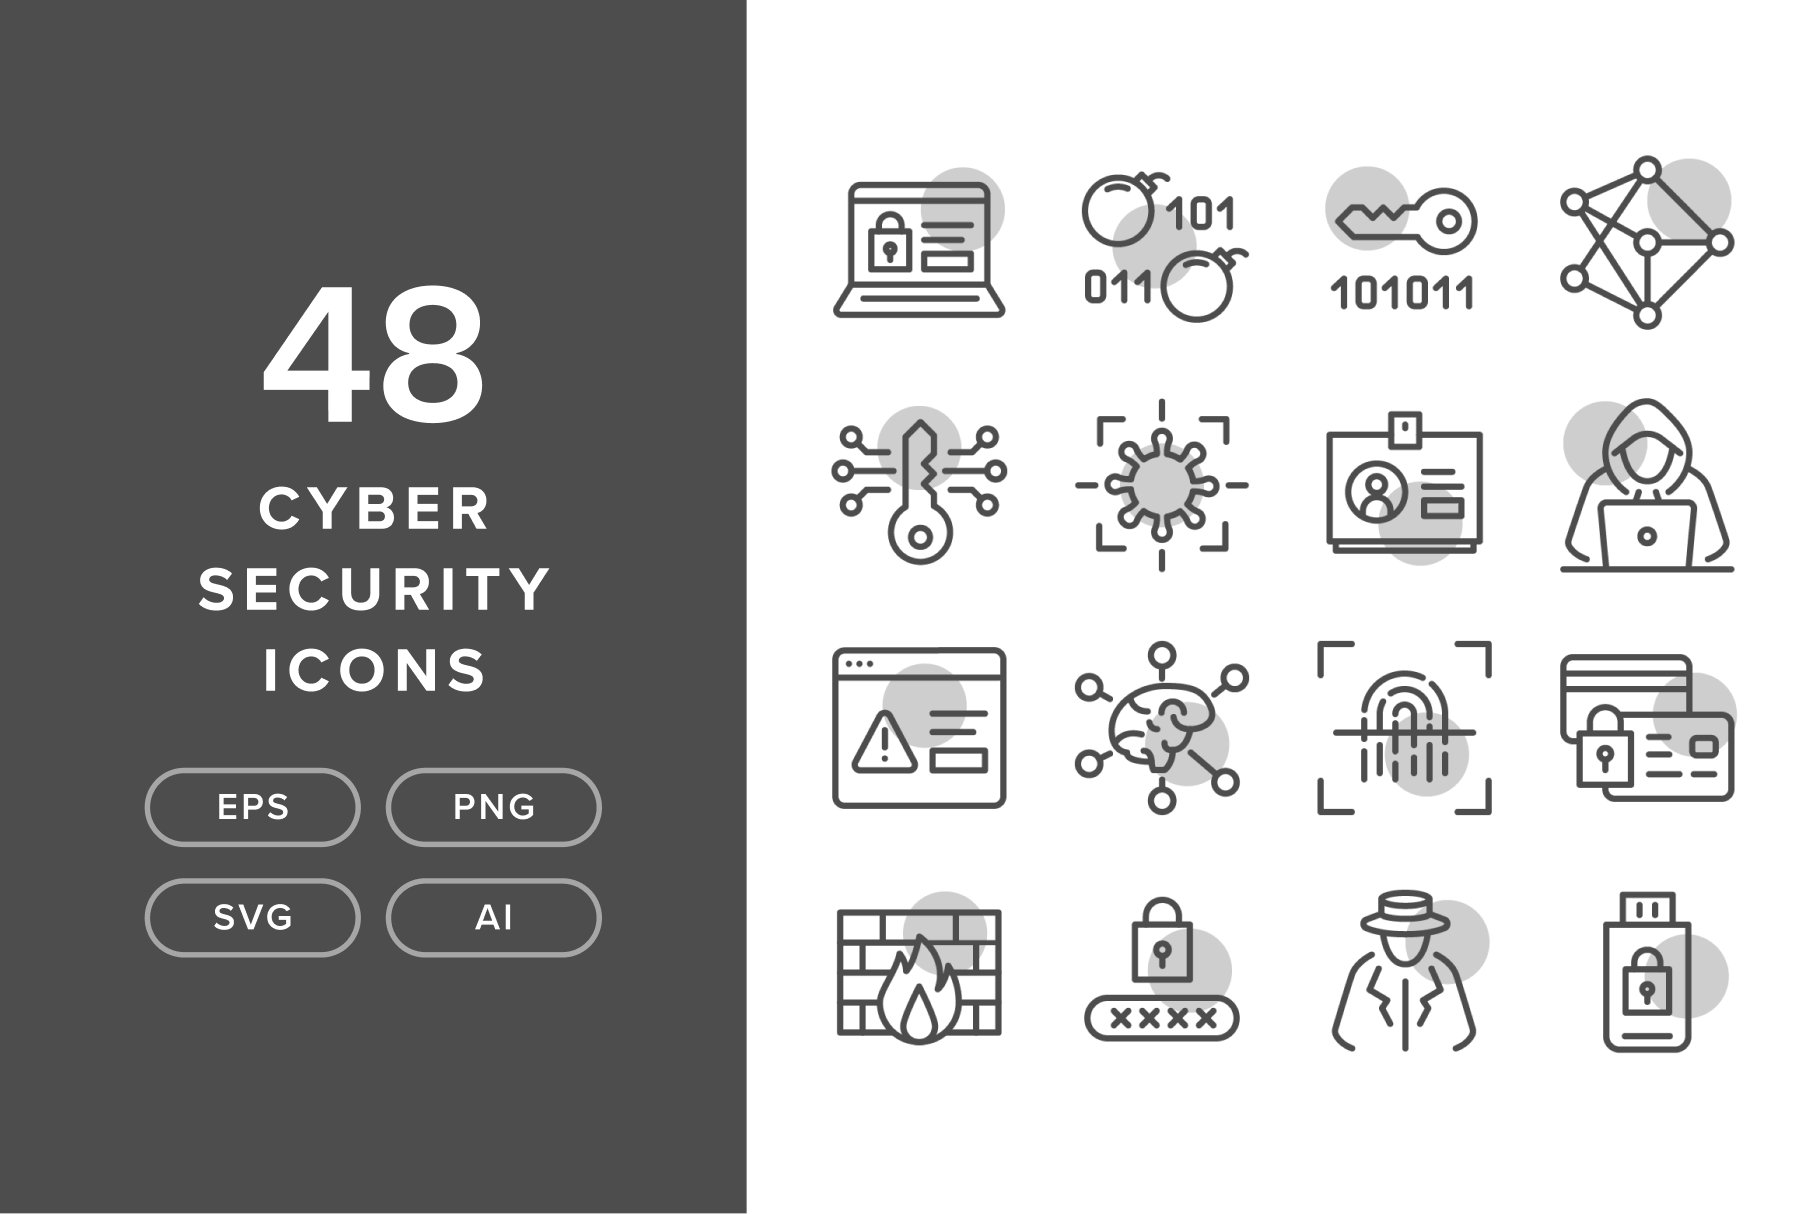 48 Cyber Security Icons cover image.